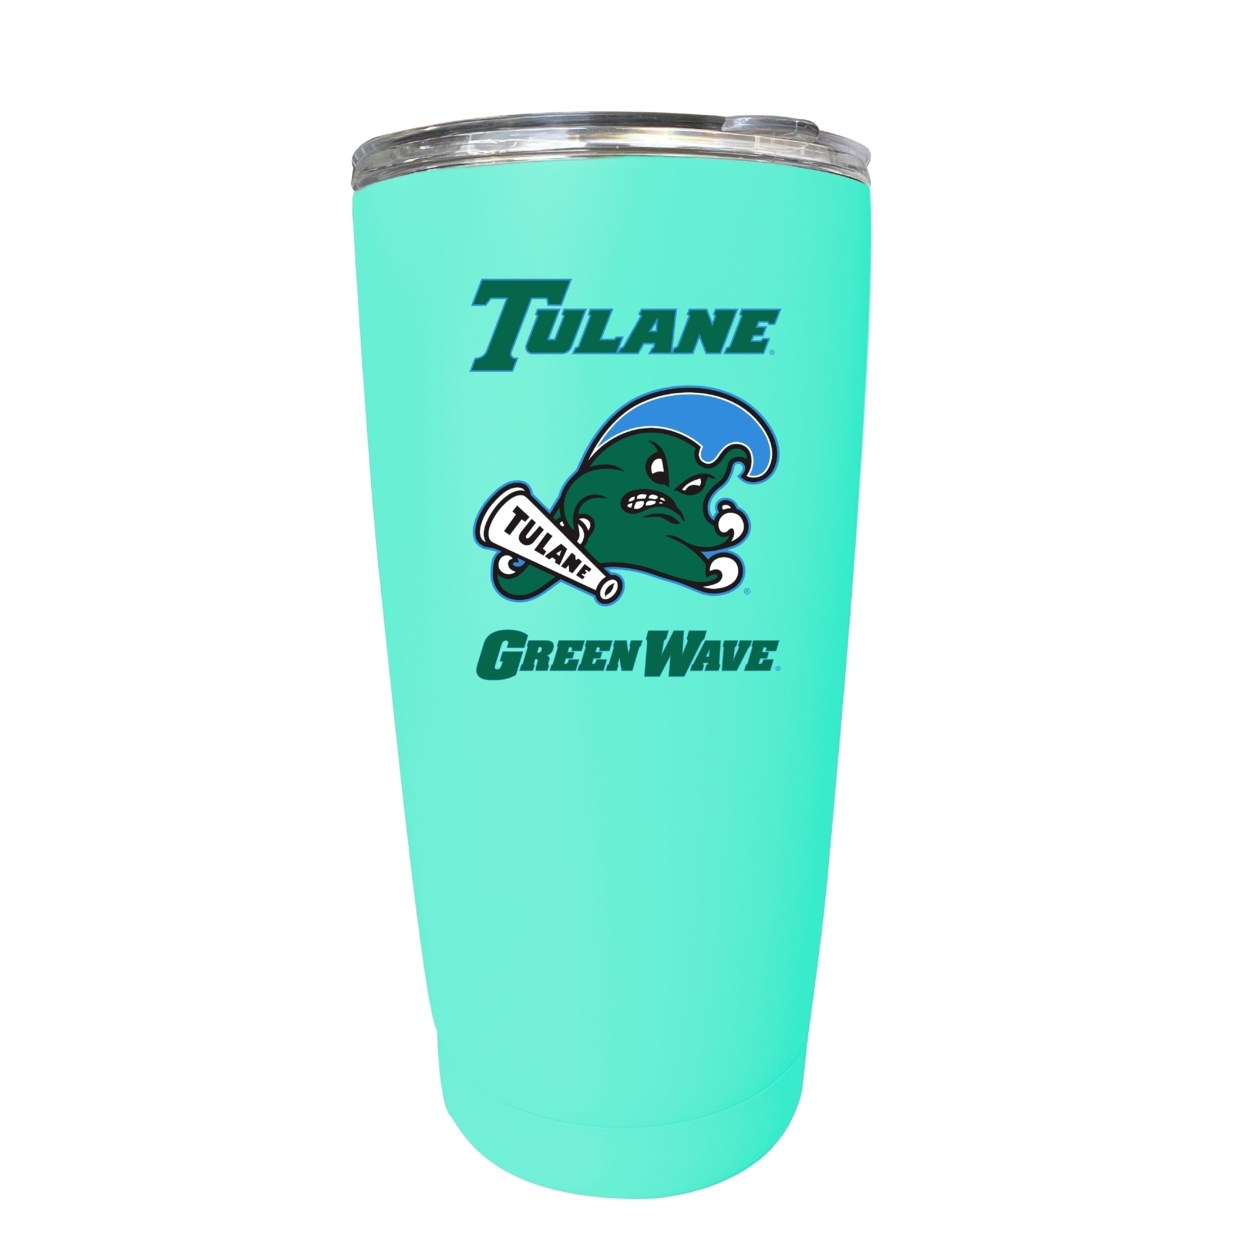 Tulane University Green Wave 16 Oz Insulated Stainless Steel Tumbler - Choose Your Color. - Navy